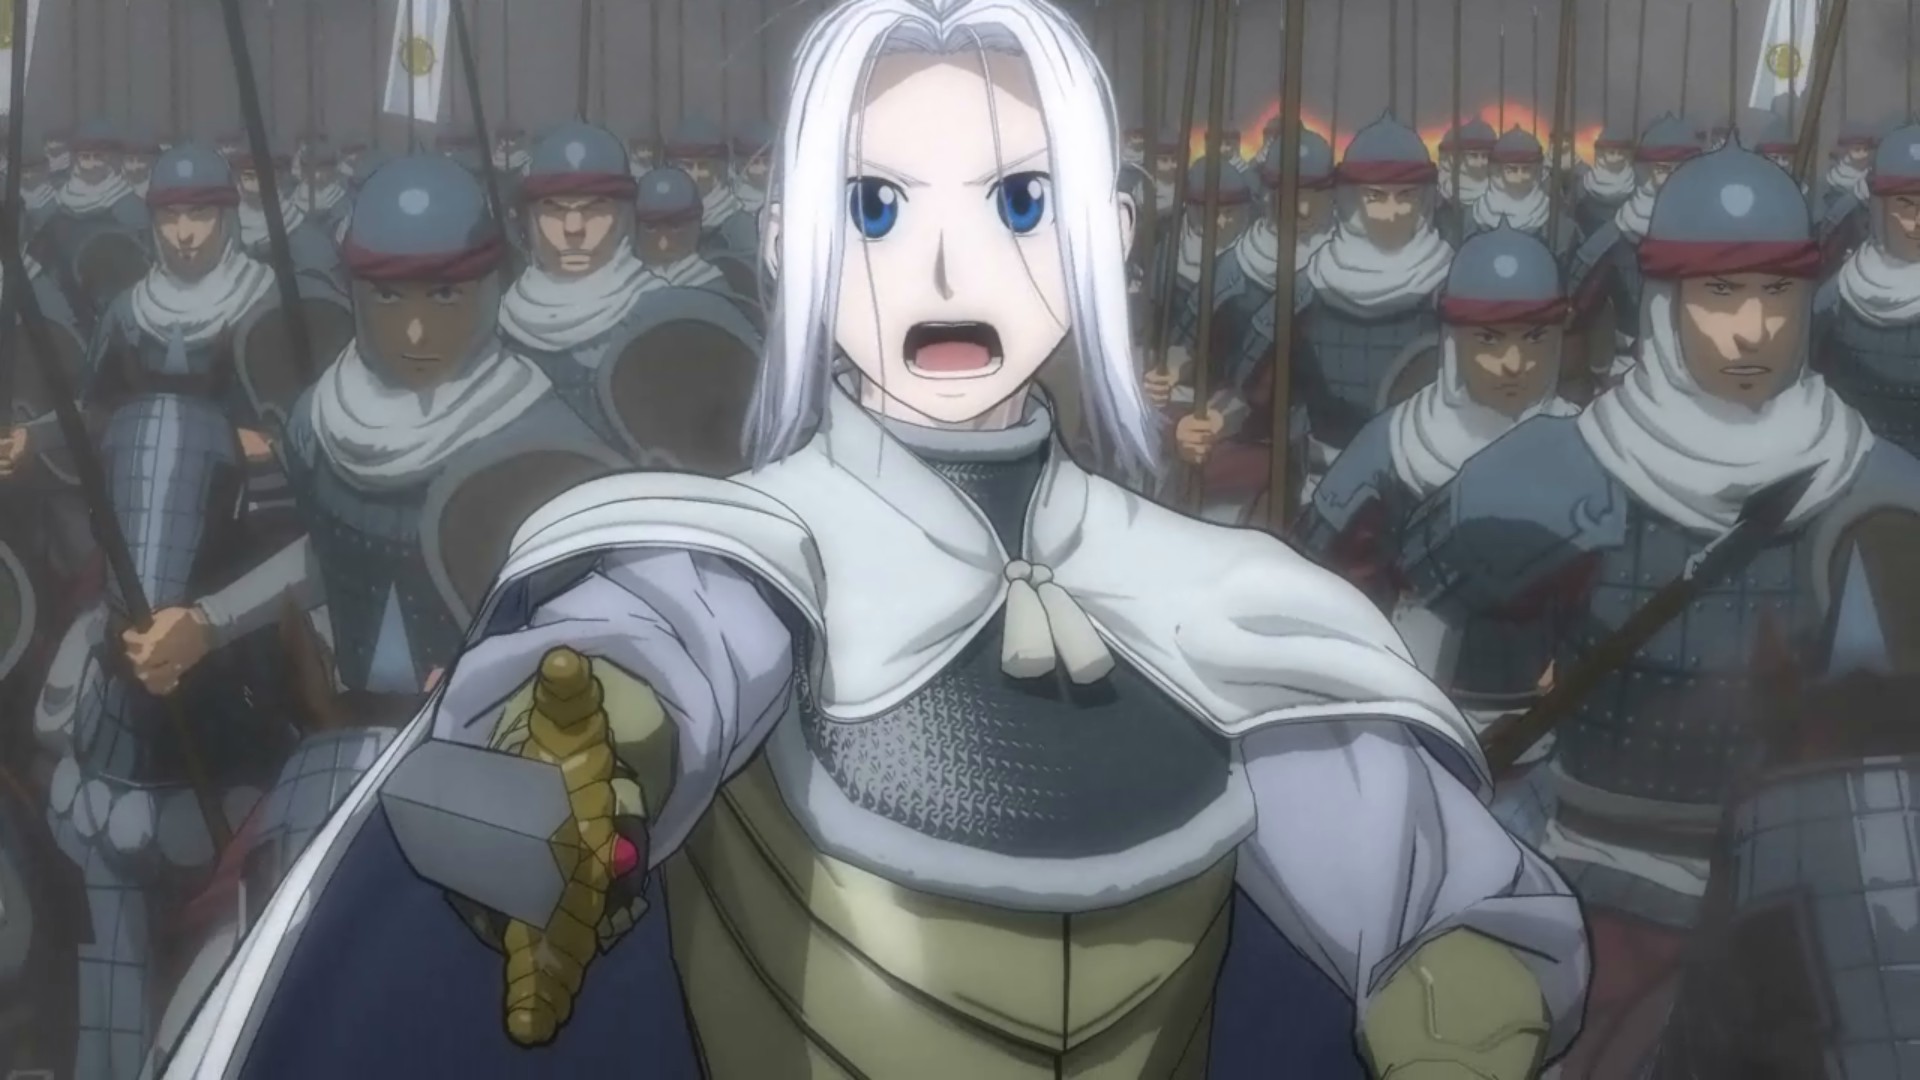 Where Does The Heroic Legend of Arslan Anime End in The Light Novel? |  Where Does The Anime Leave Off?